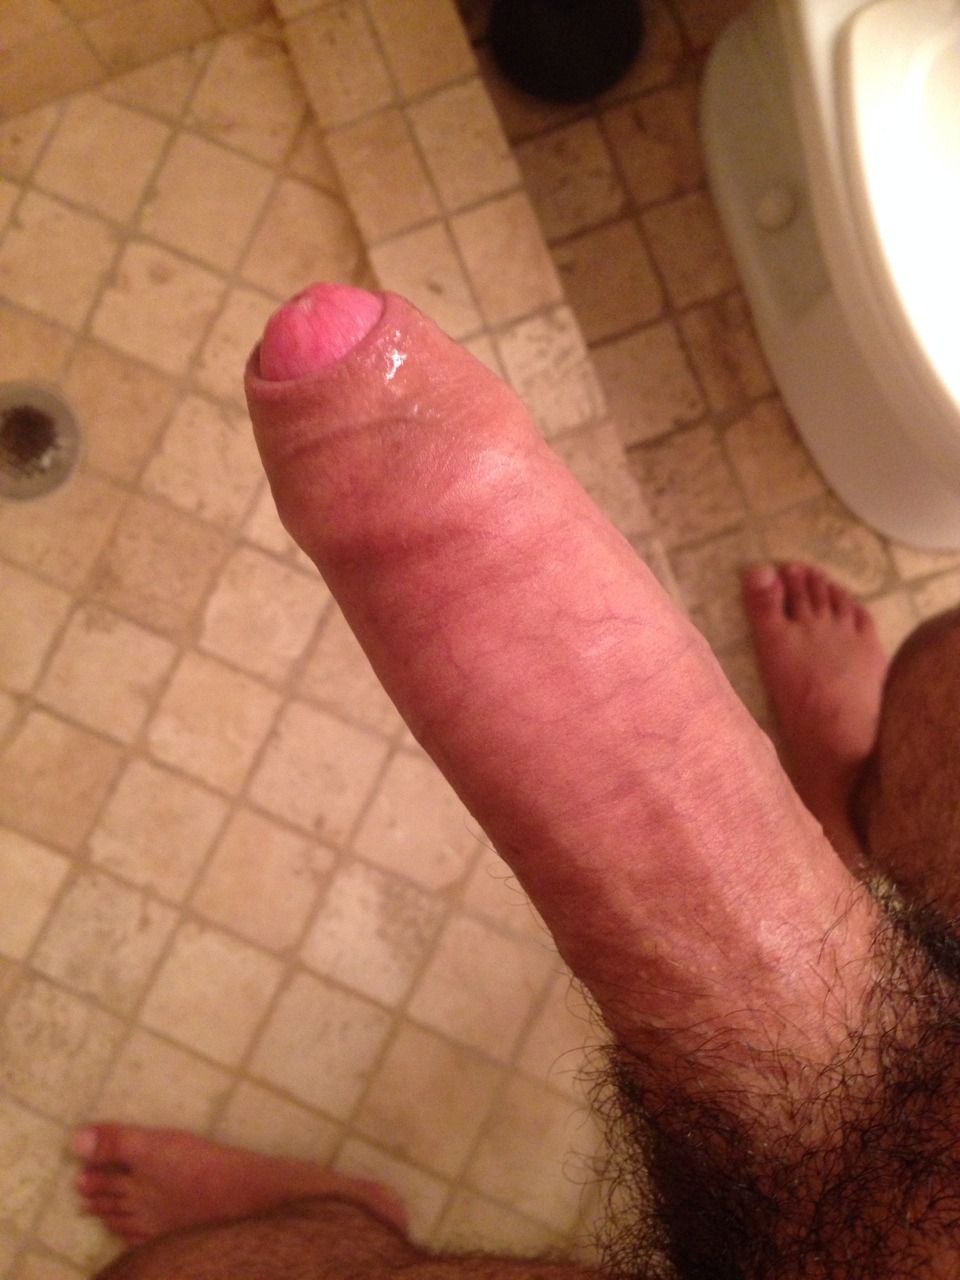 My user name is JACKRYAN1123 and this is my cock. hit me up!!